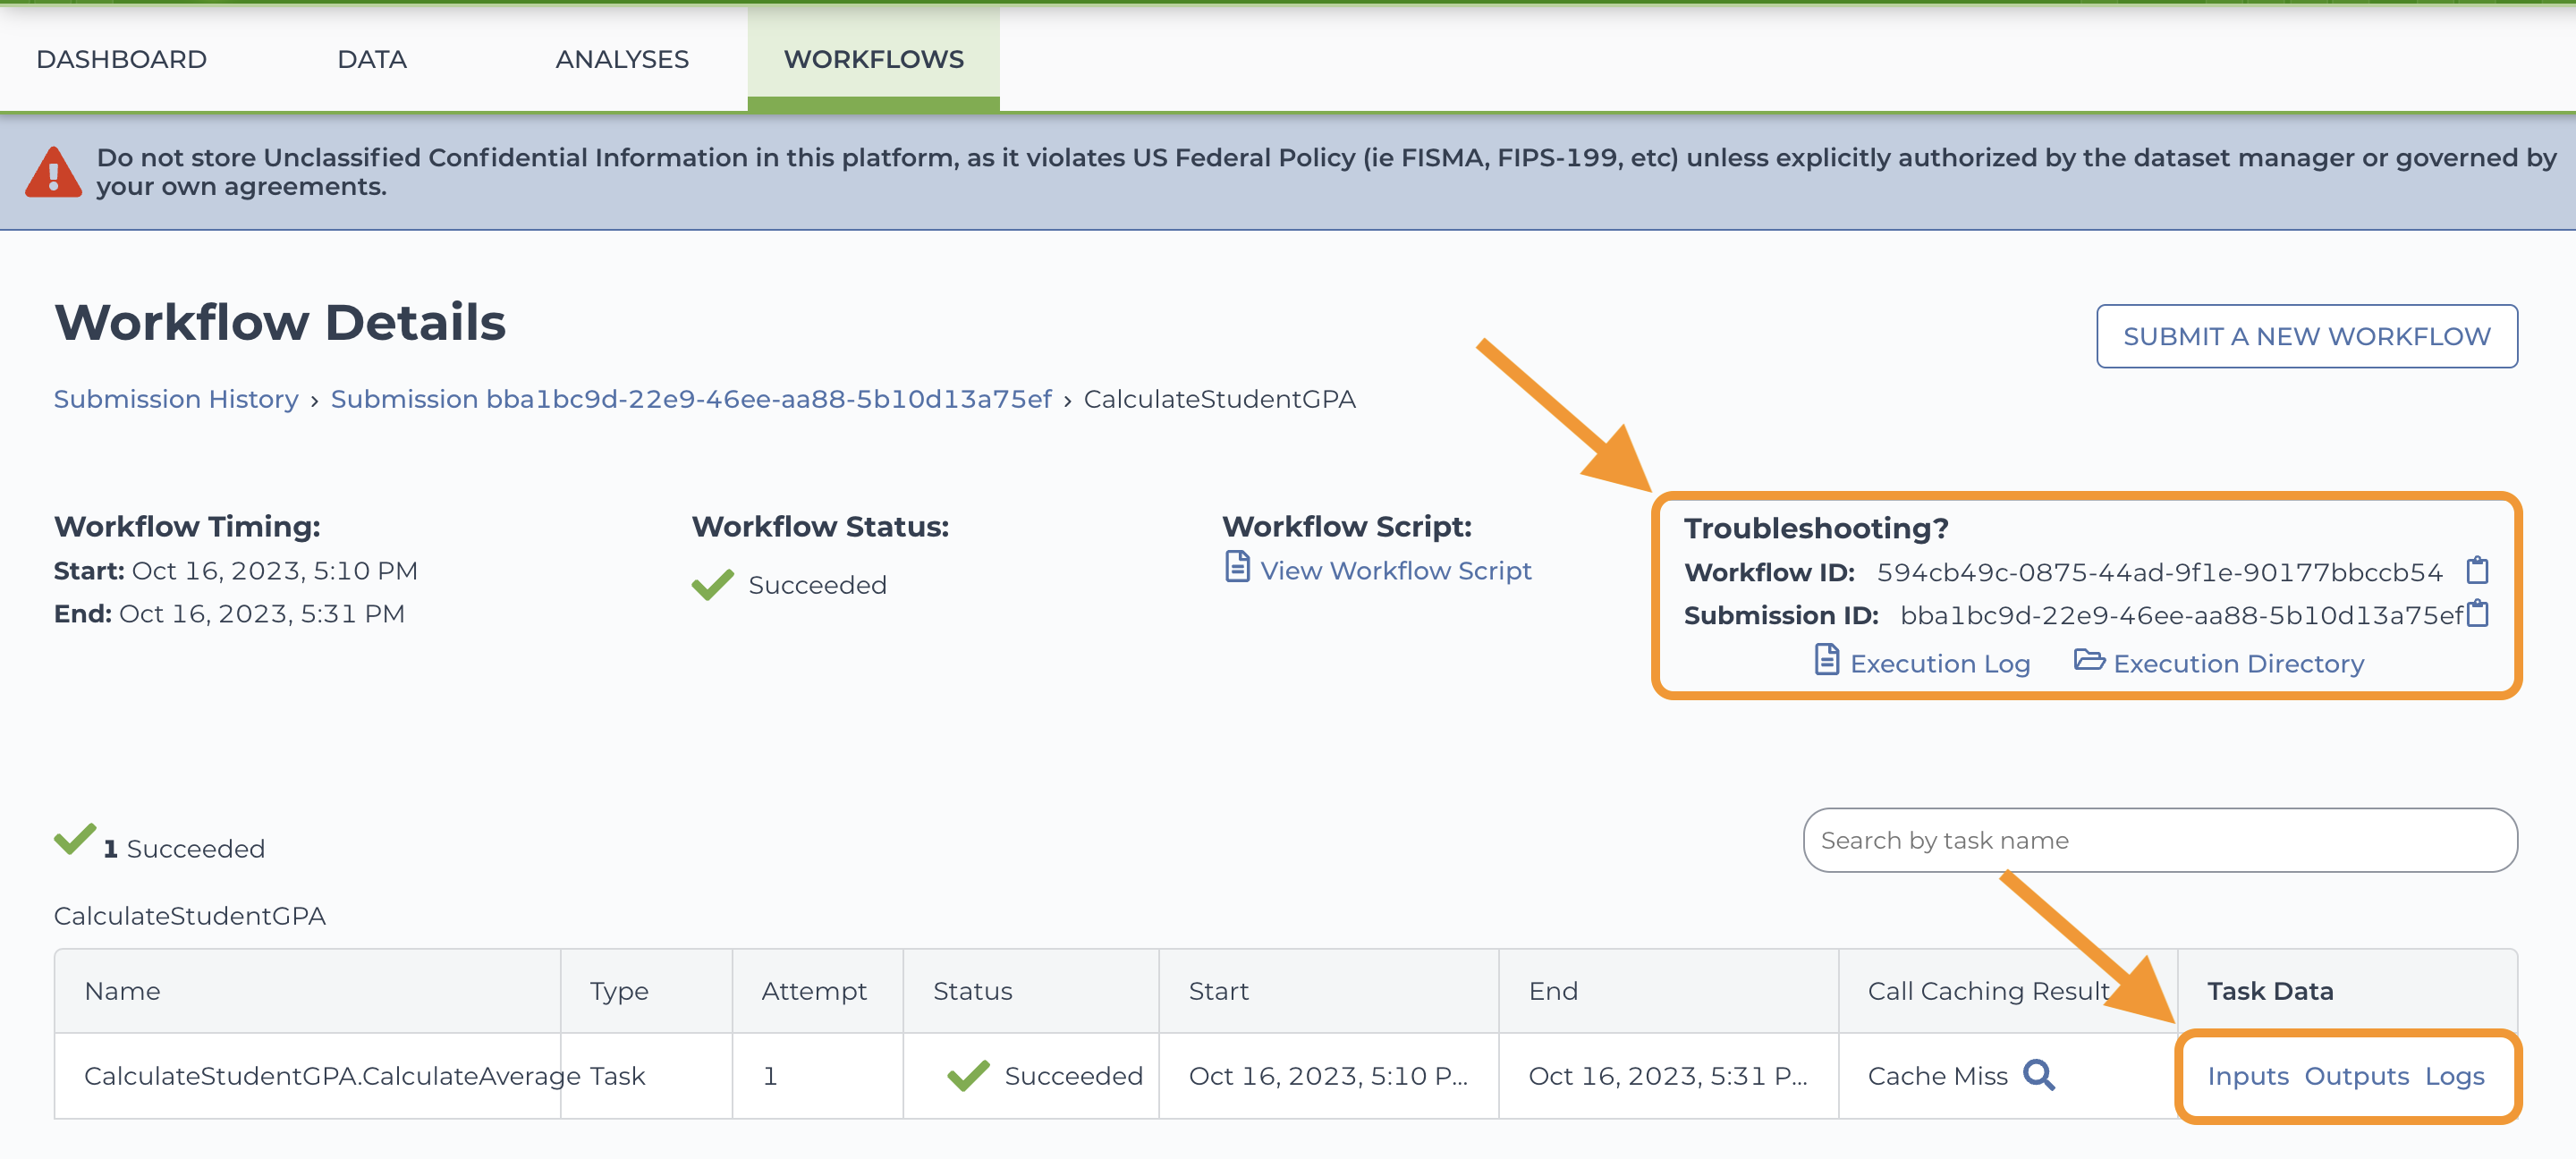 ToA-Troubleshooting_Workflow-details-page_Screenshot.png